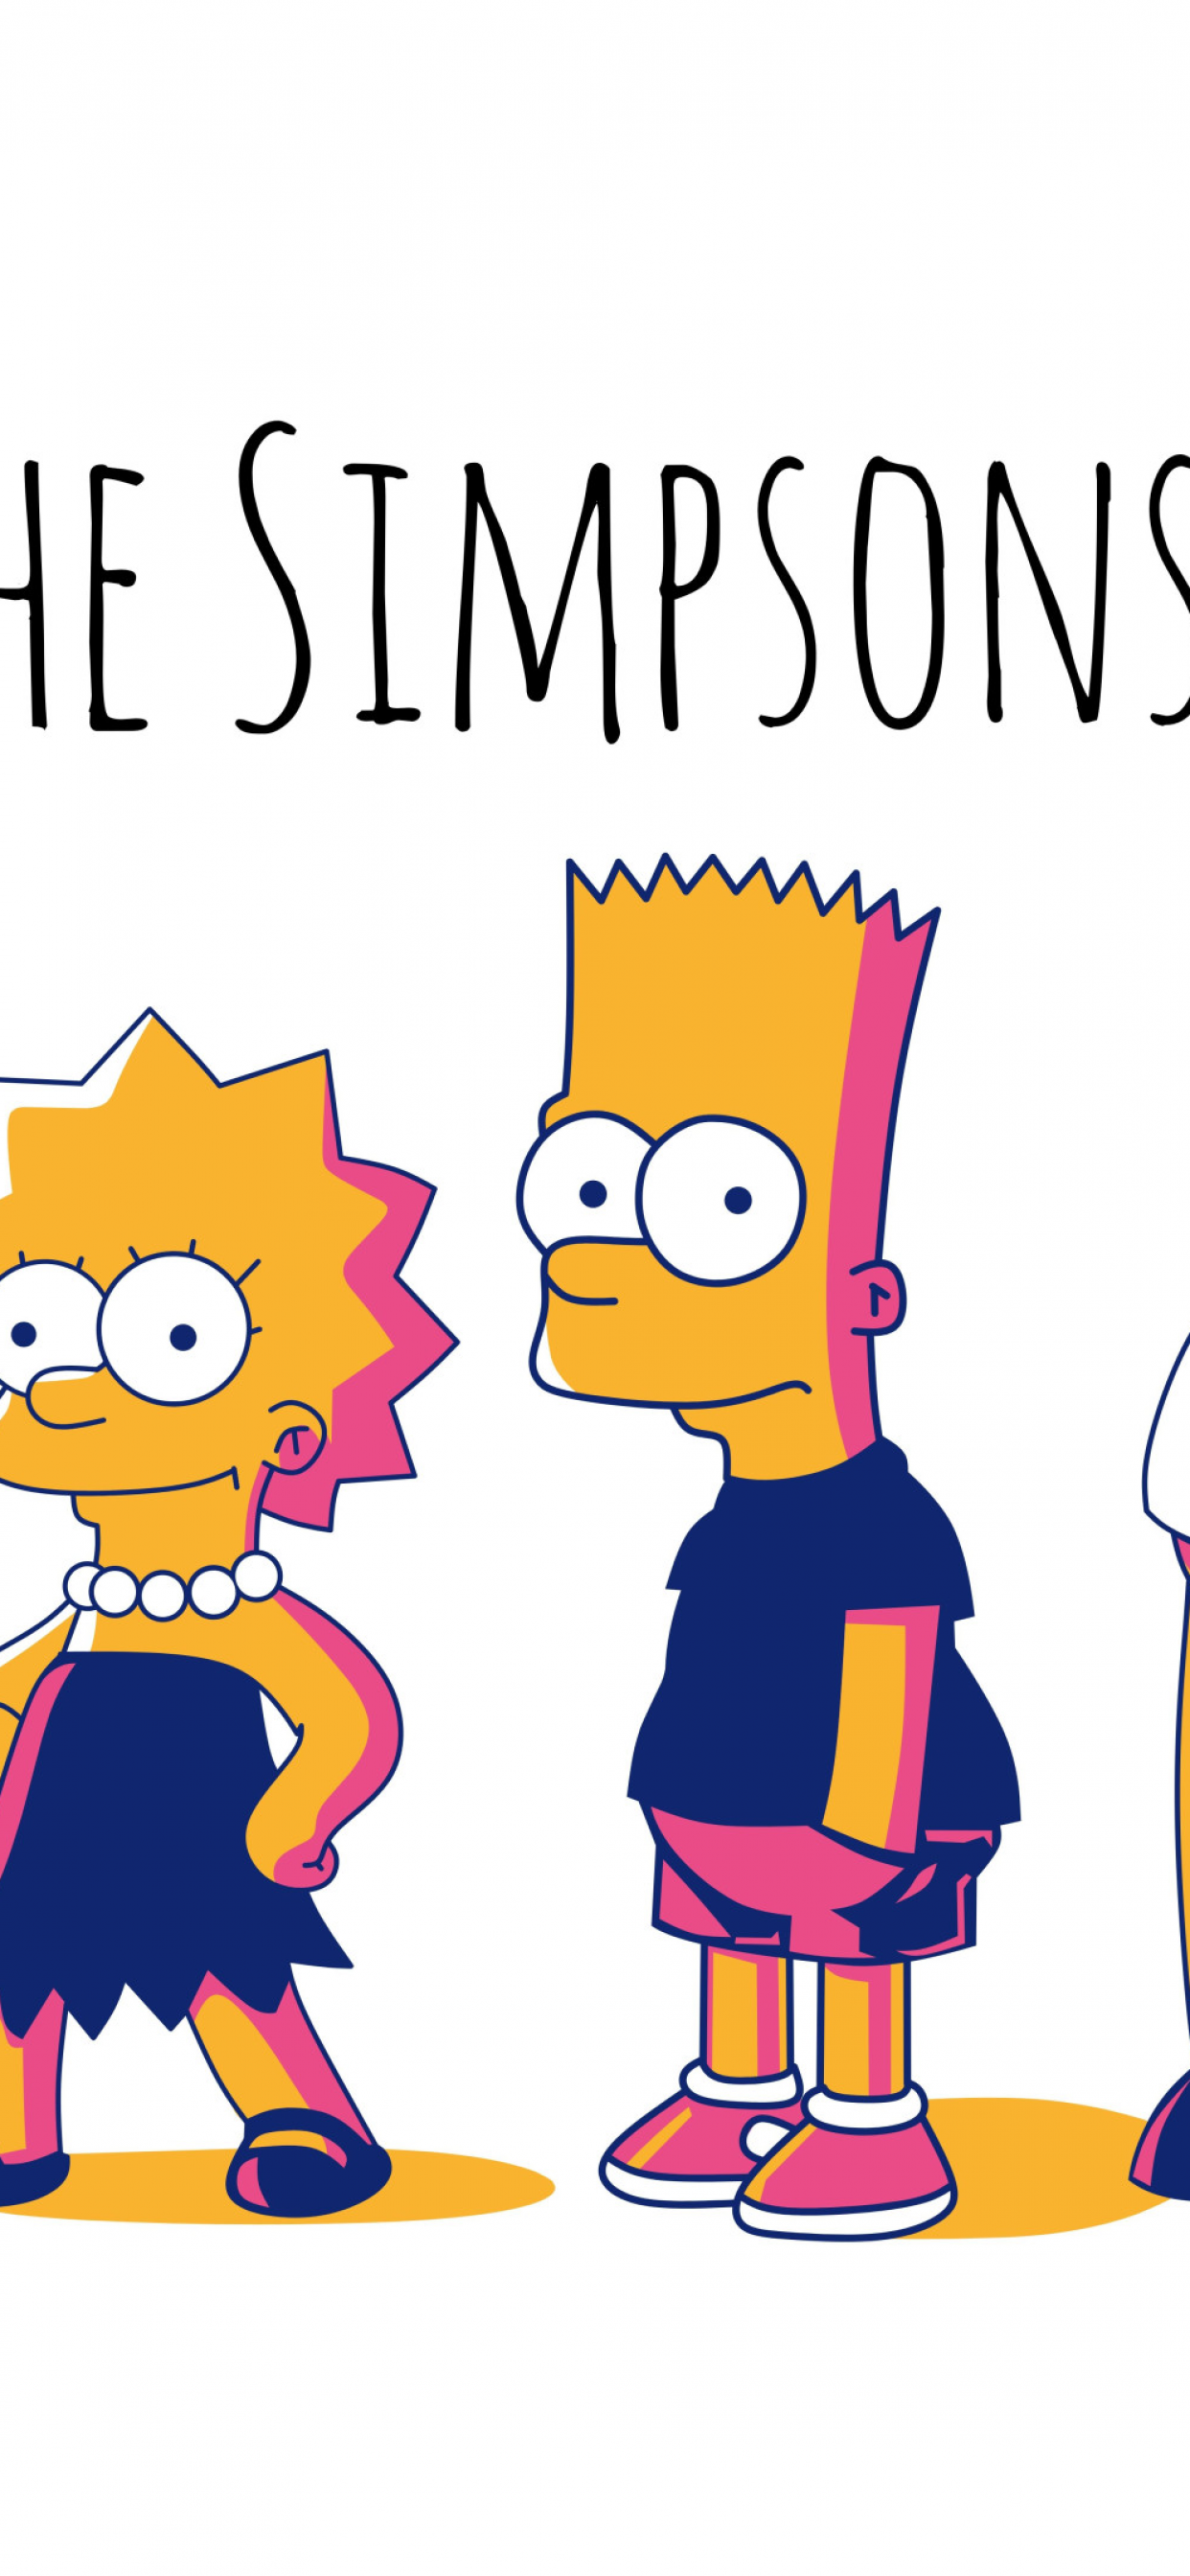 Lisa Simpson on Instagram Wyr go into the future or into the past  lisasimpson moods  Wallpaper iphone disney Iphone wallpaper Lisa  simpson